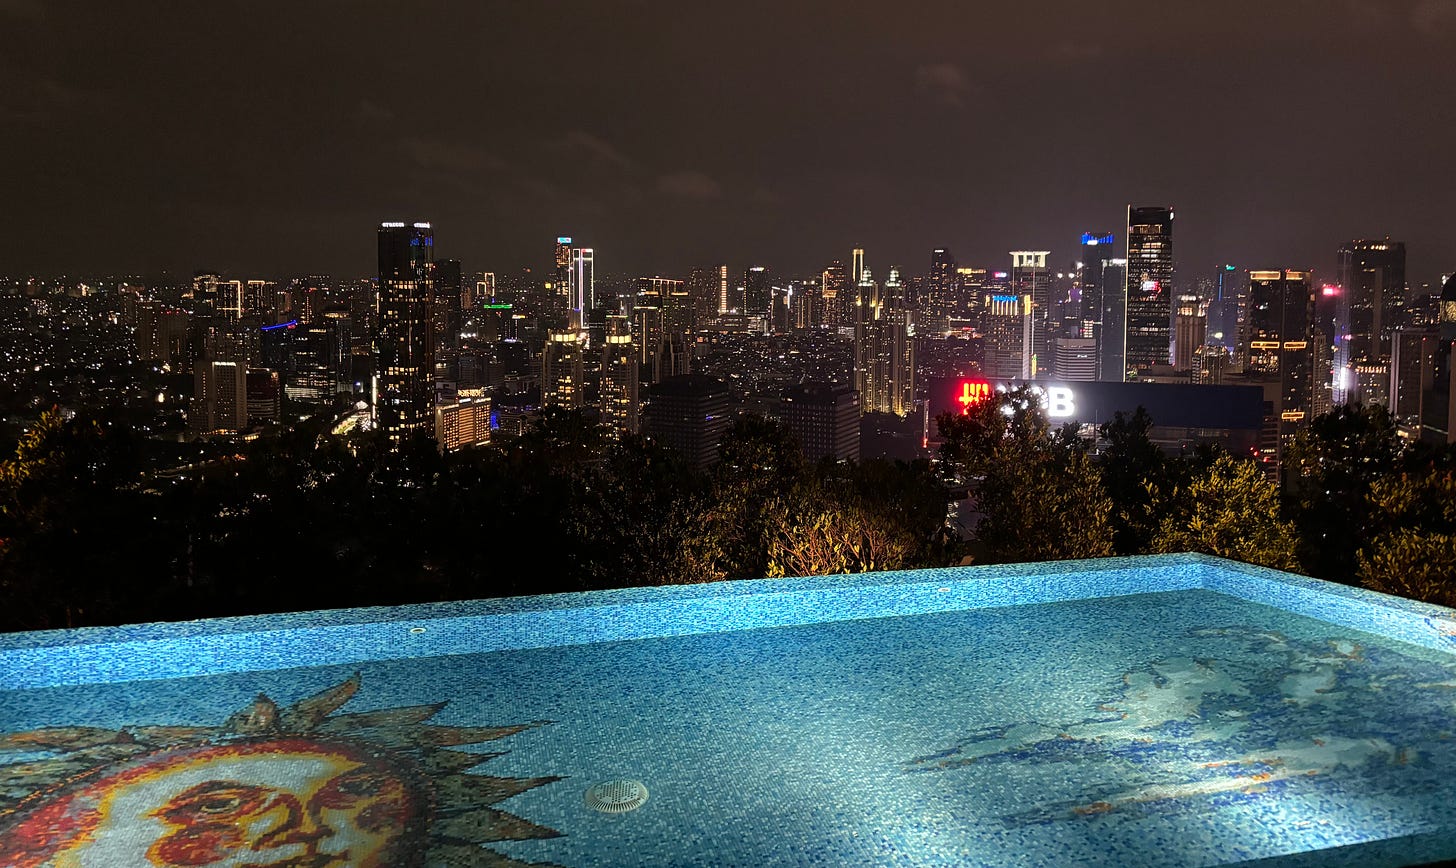 The view from the rooftop Skye Bar in Jakarta